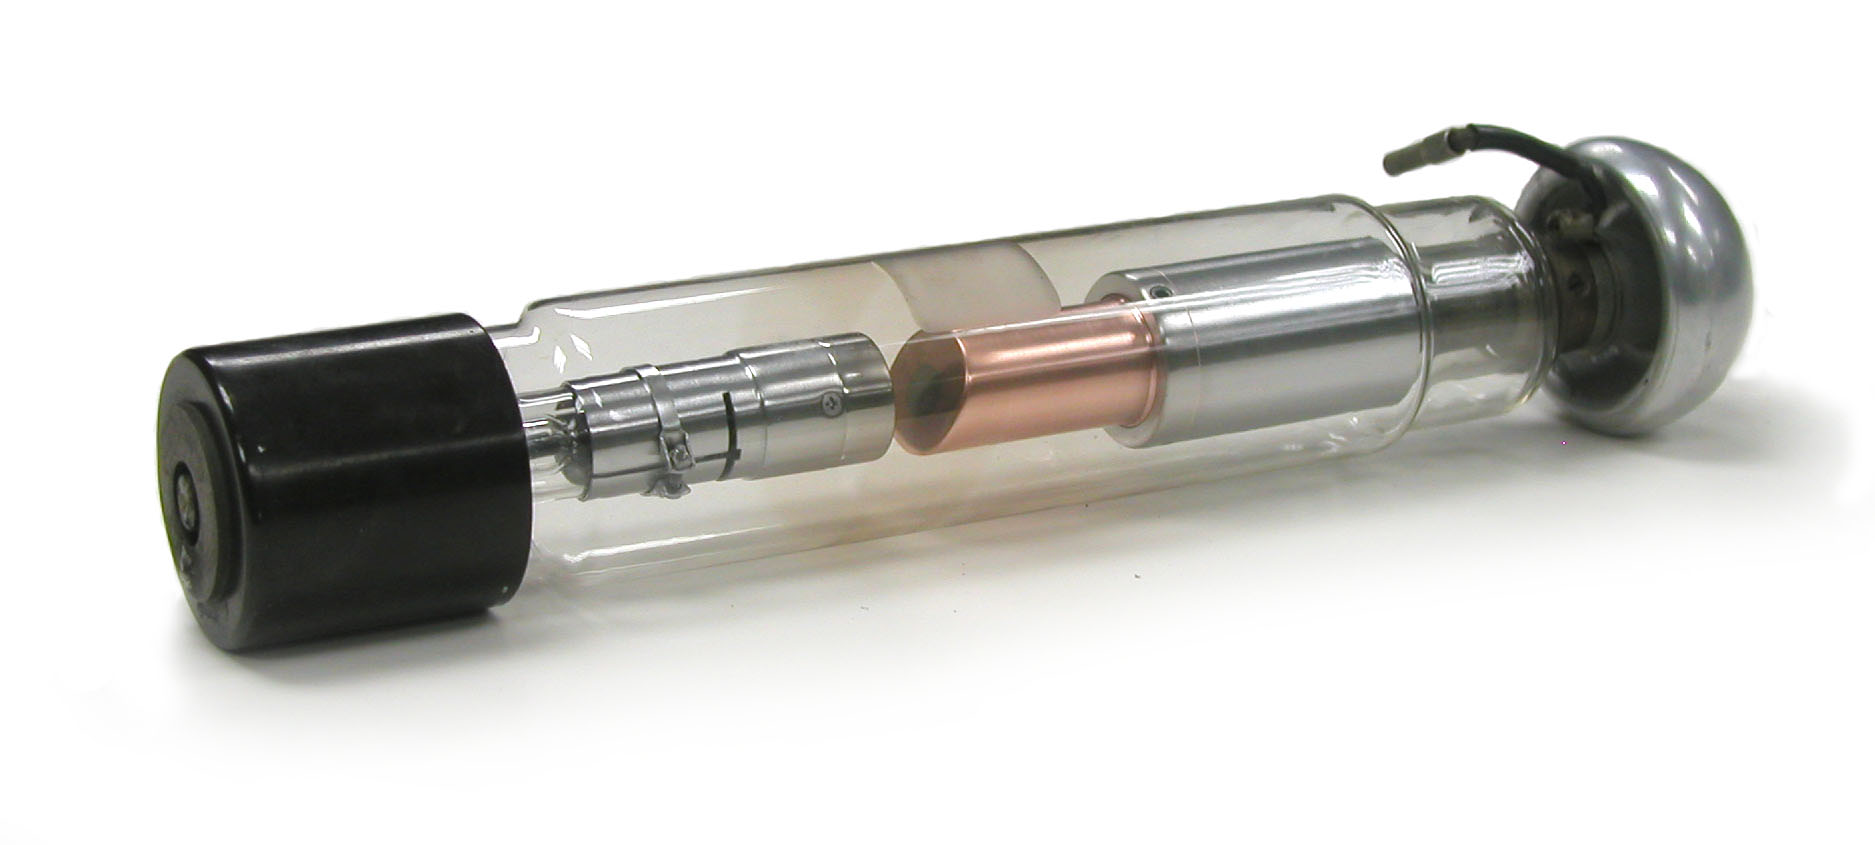 General Electric XPD Tube (ca. 1930s, 1940s)  